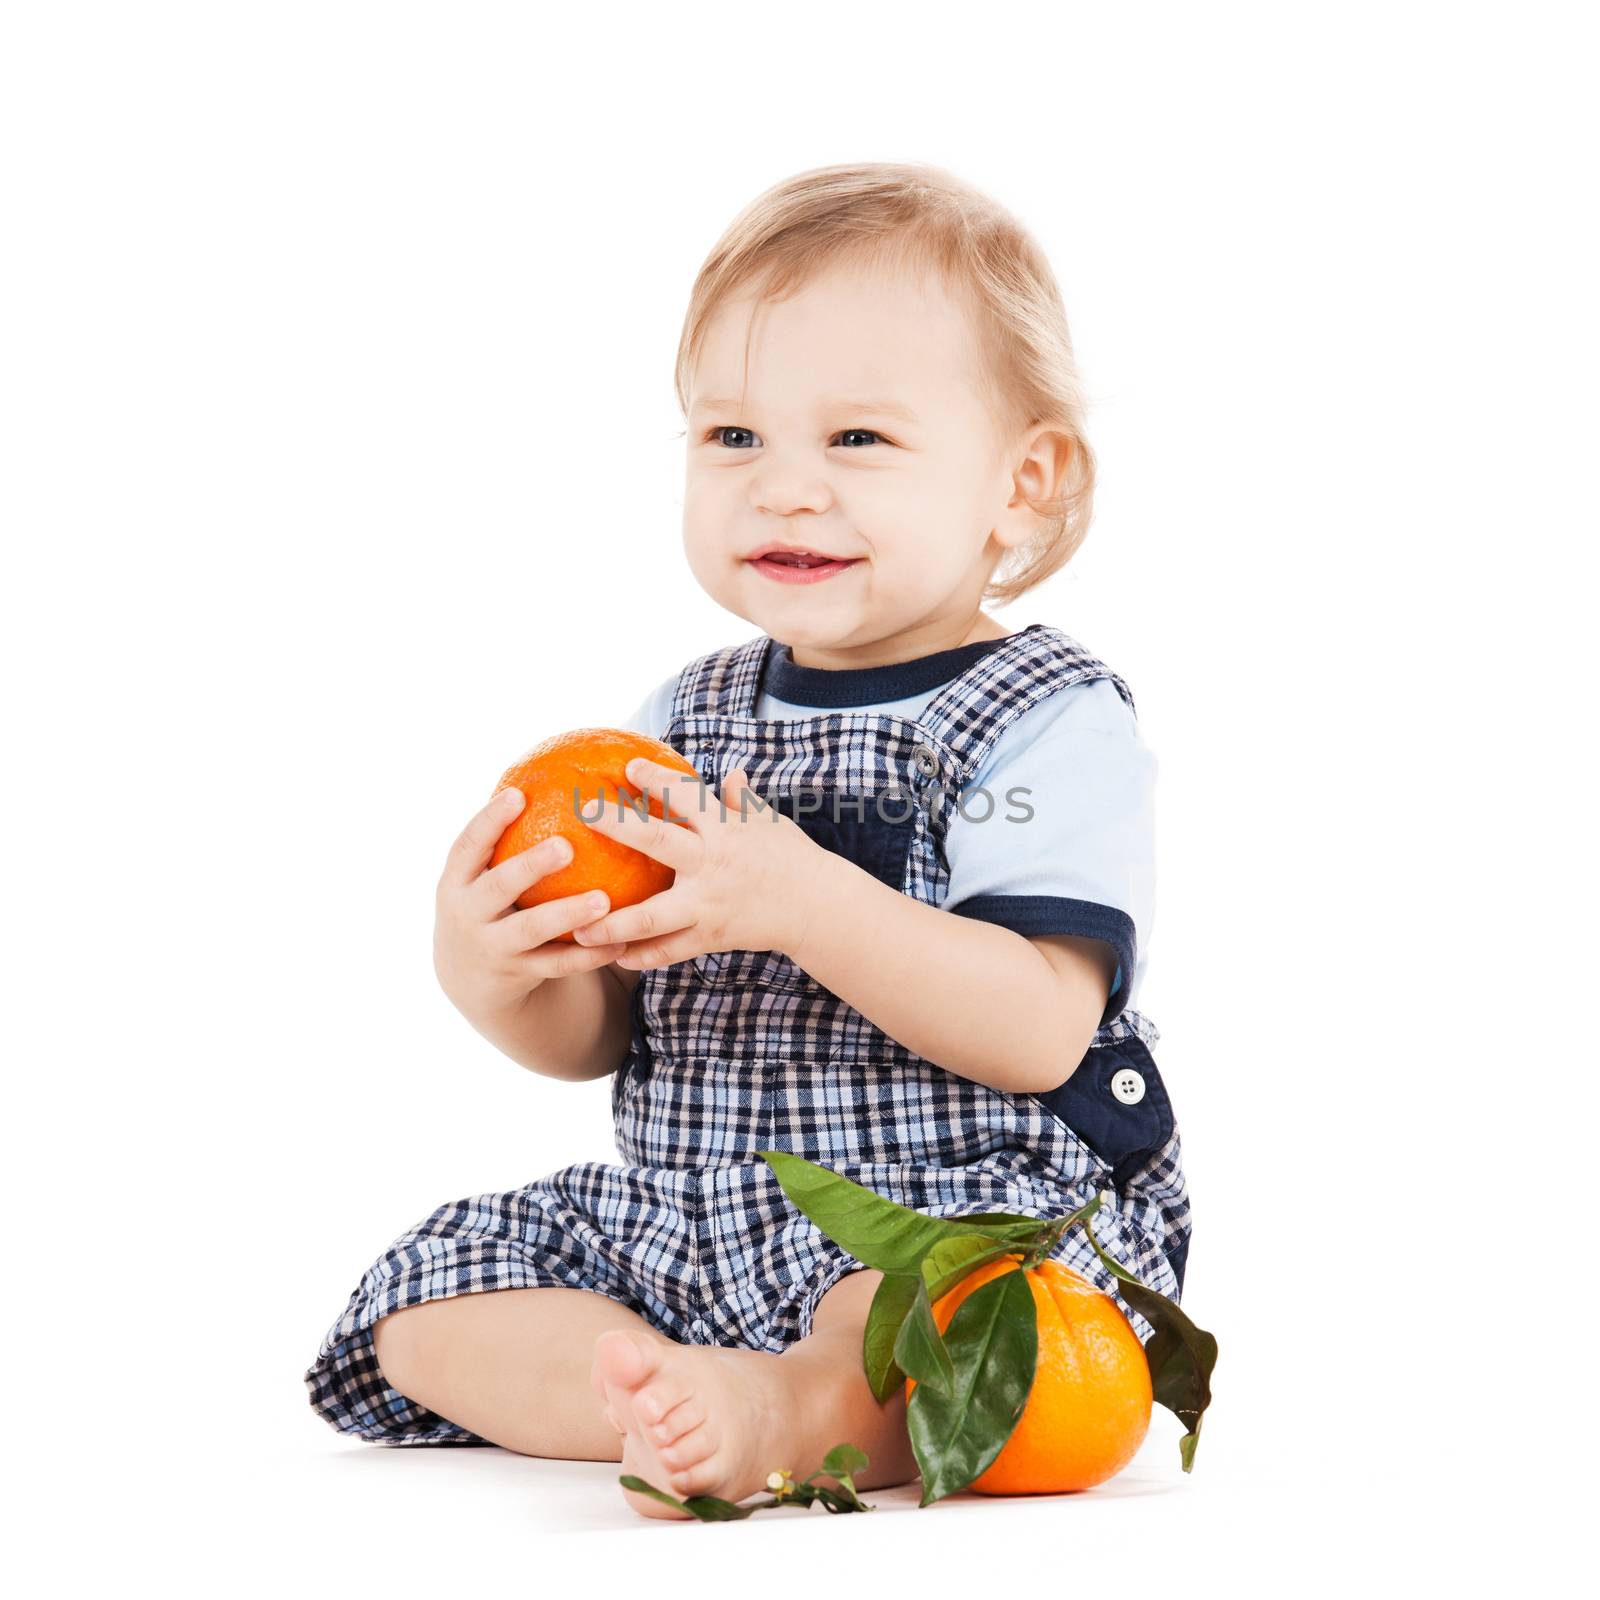 childhood and healthy food concept - cute toddler eating orange